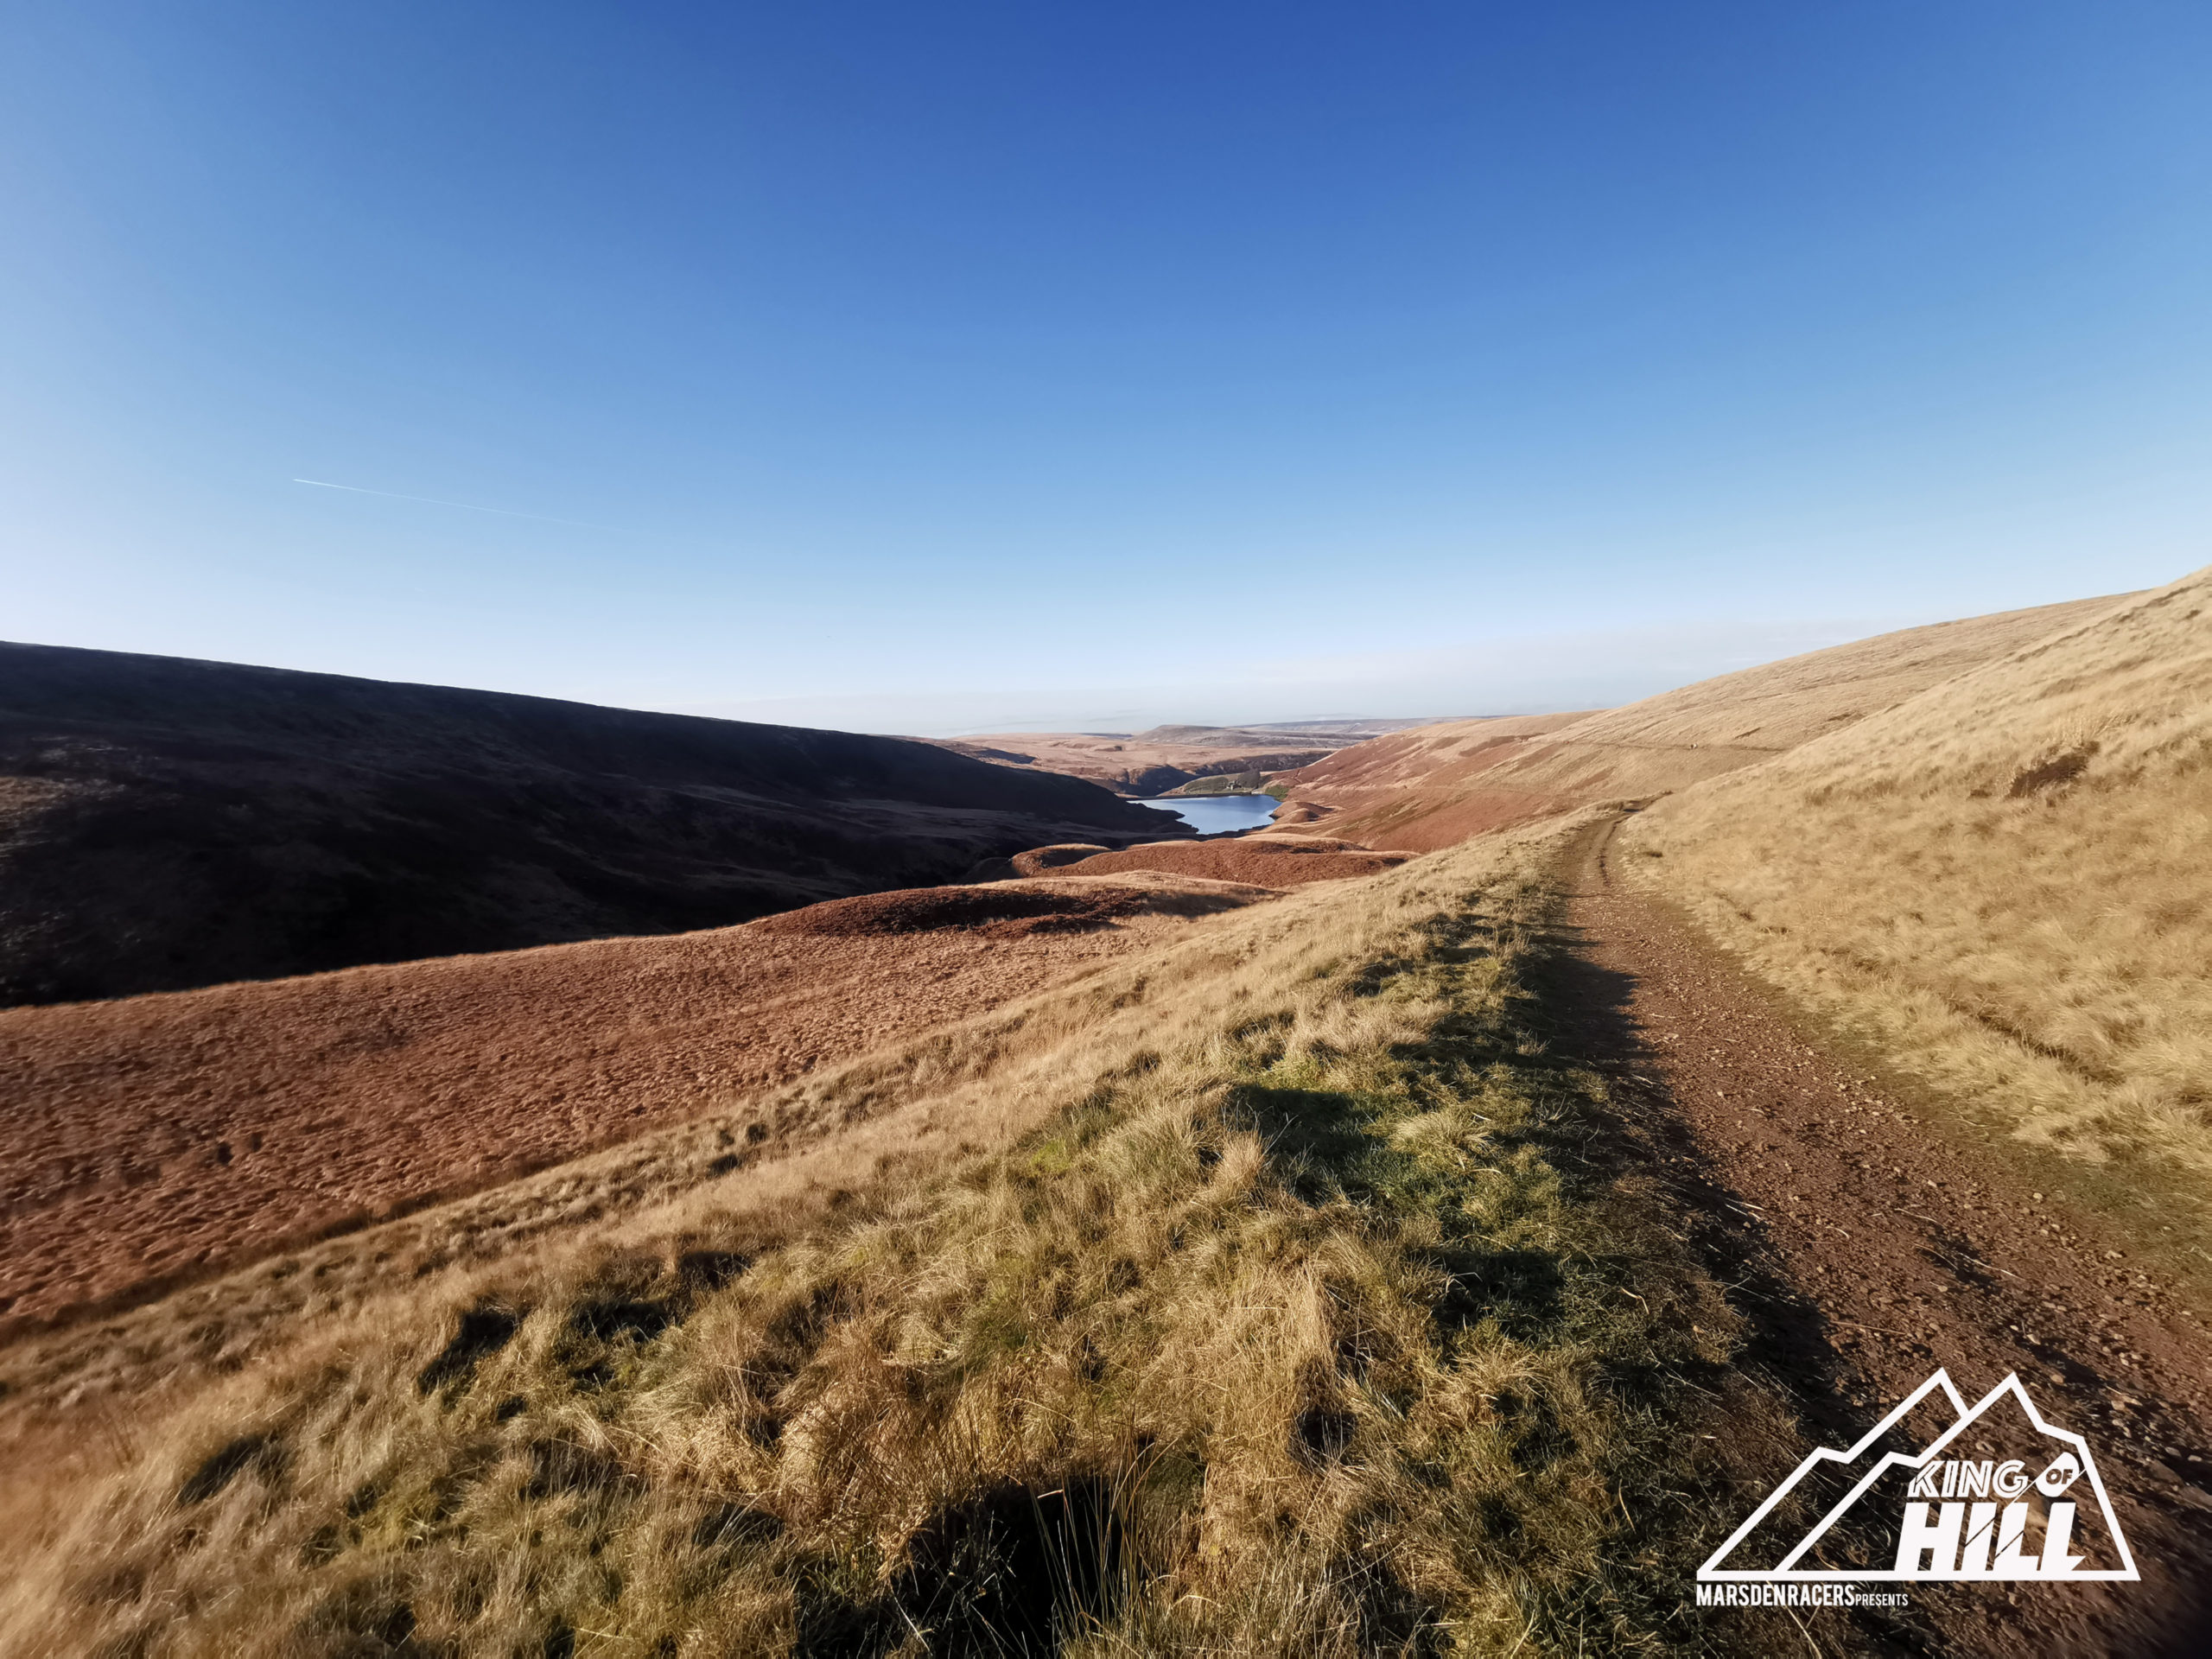 King of the Hill Course Route in Marsden